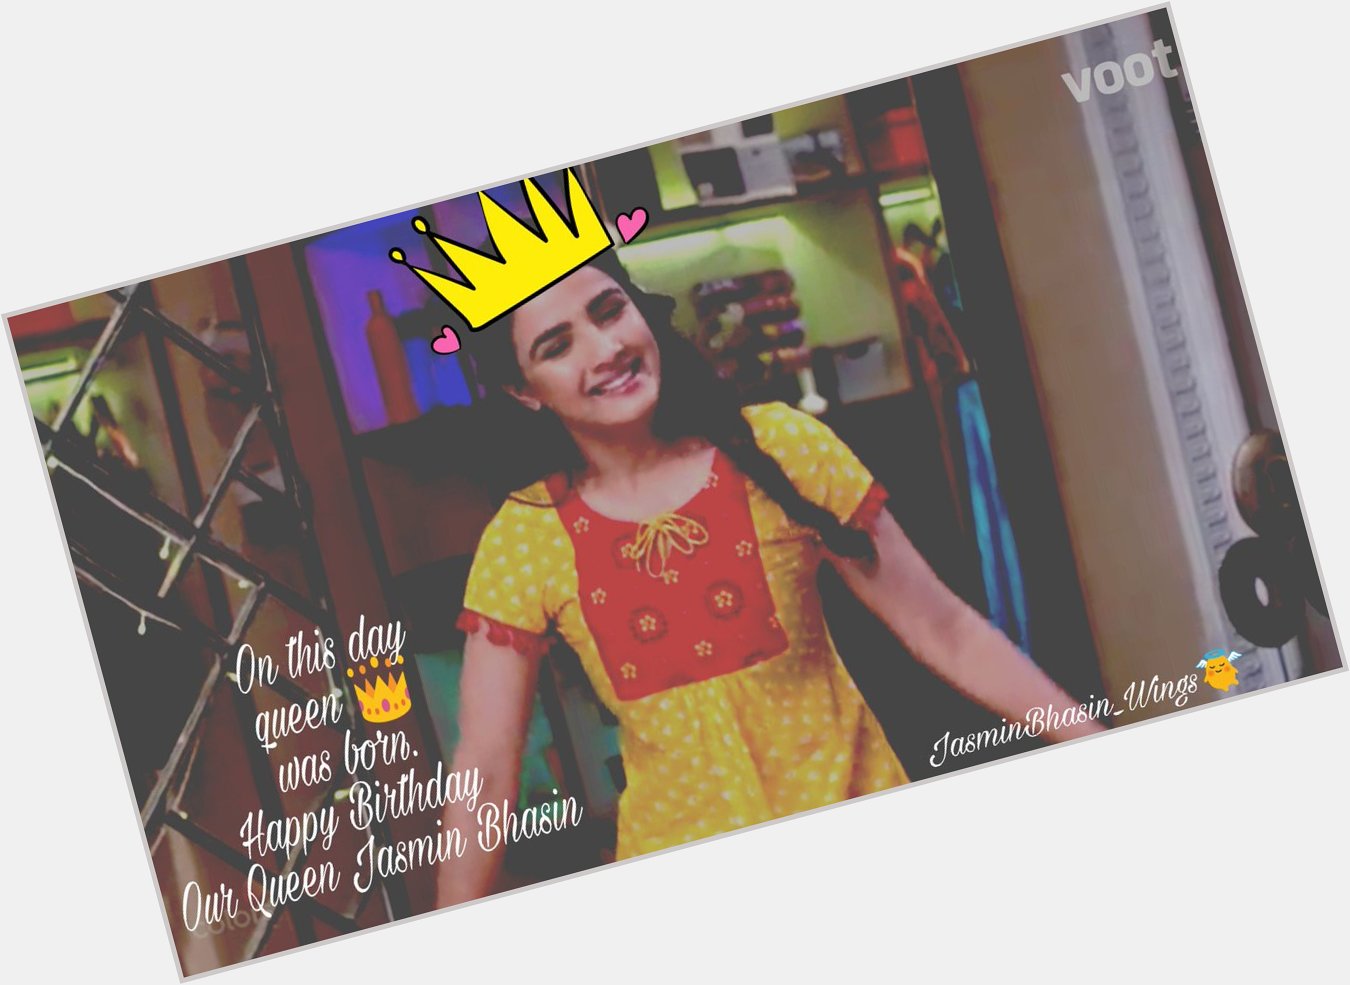 On this day
queen was born.
Happy Birthday 
Our Queen Jasmin Bhasin 